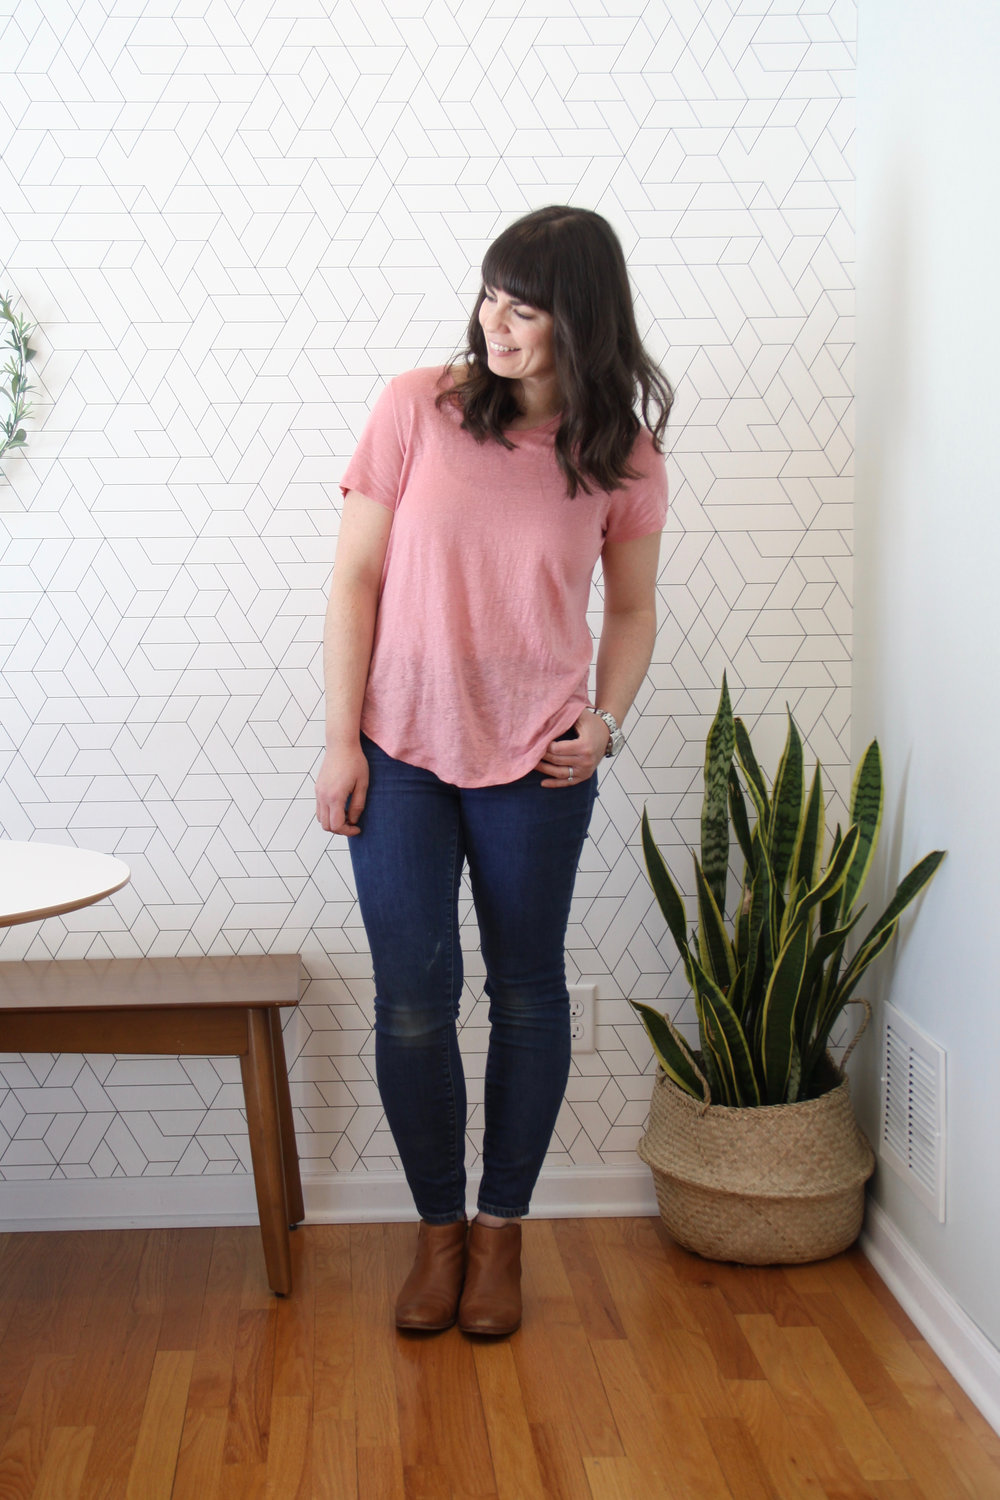 Spring 10 x 10 Wardrobe Challenge Pink Linen Tee and Madewell Skinny Jeans